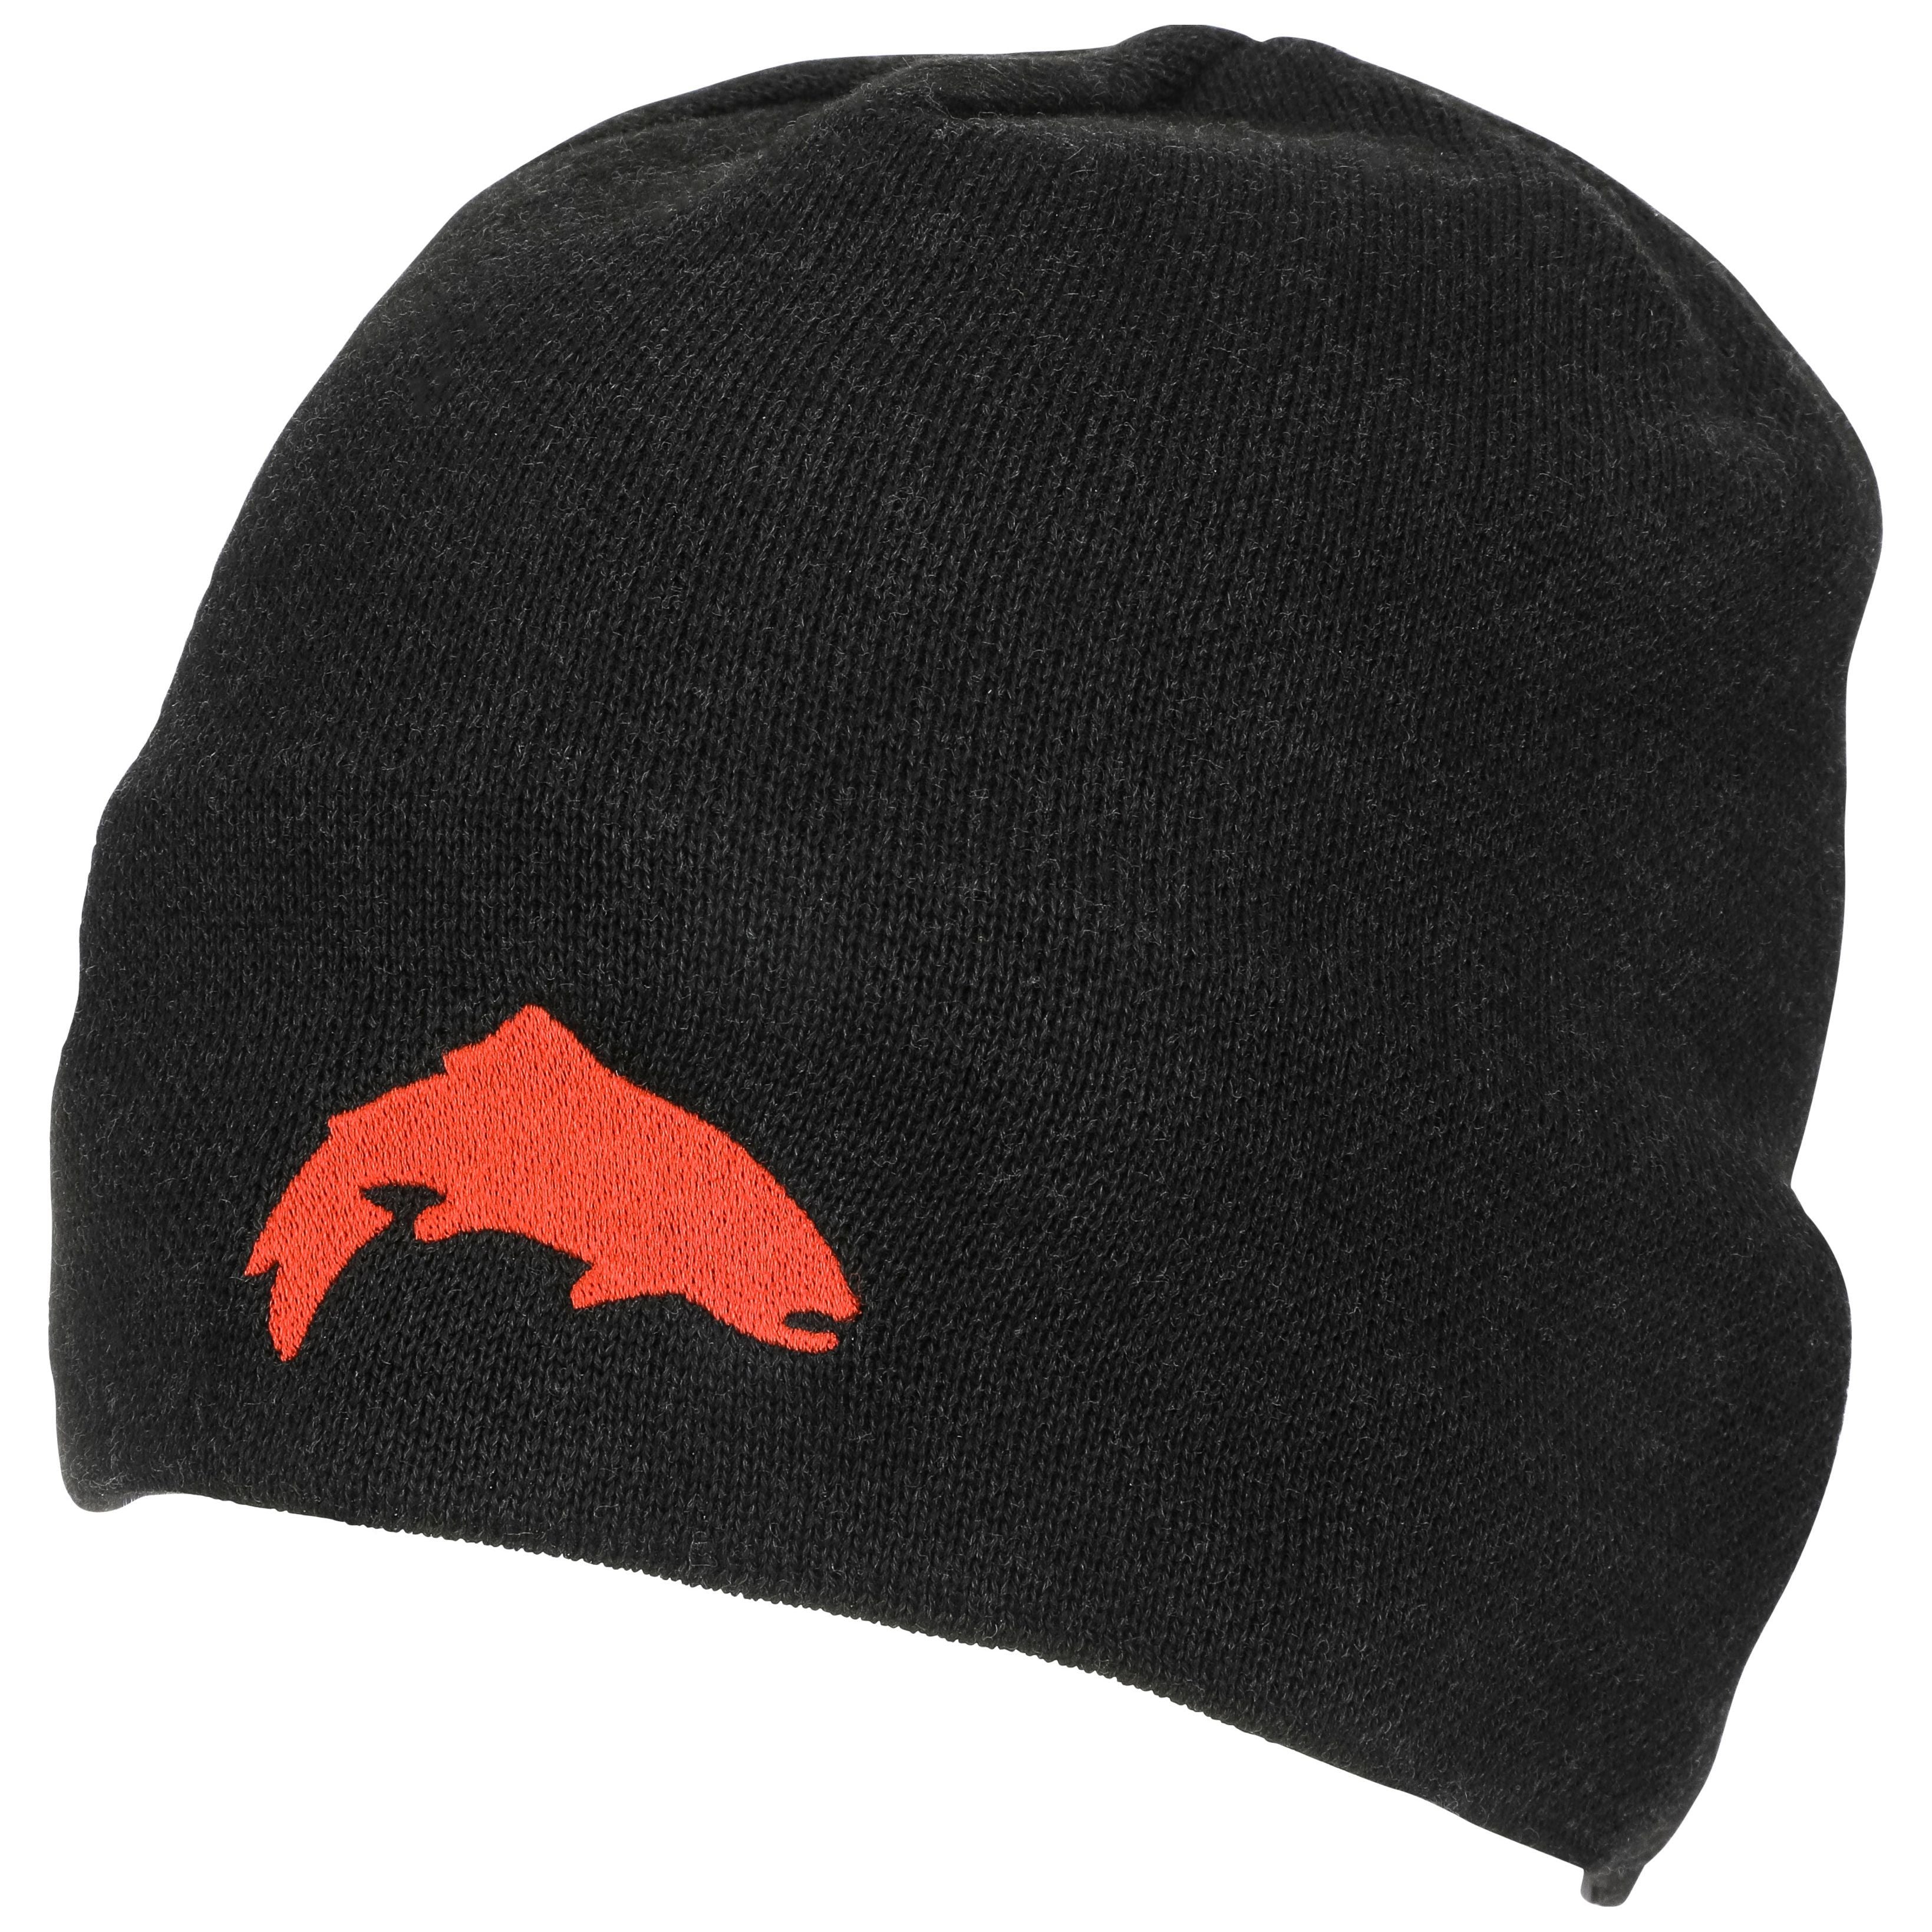 Simms Everyday Beanie Carbon Image 1